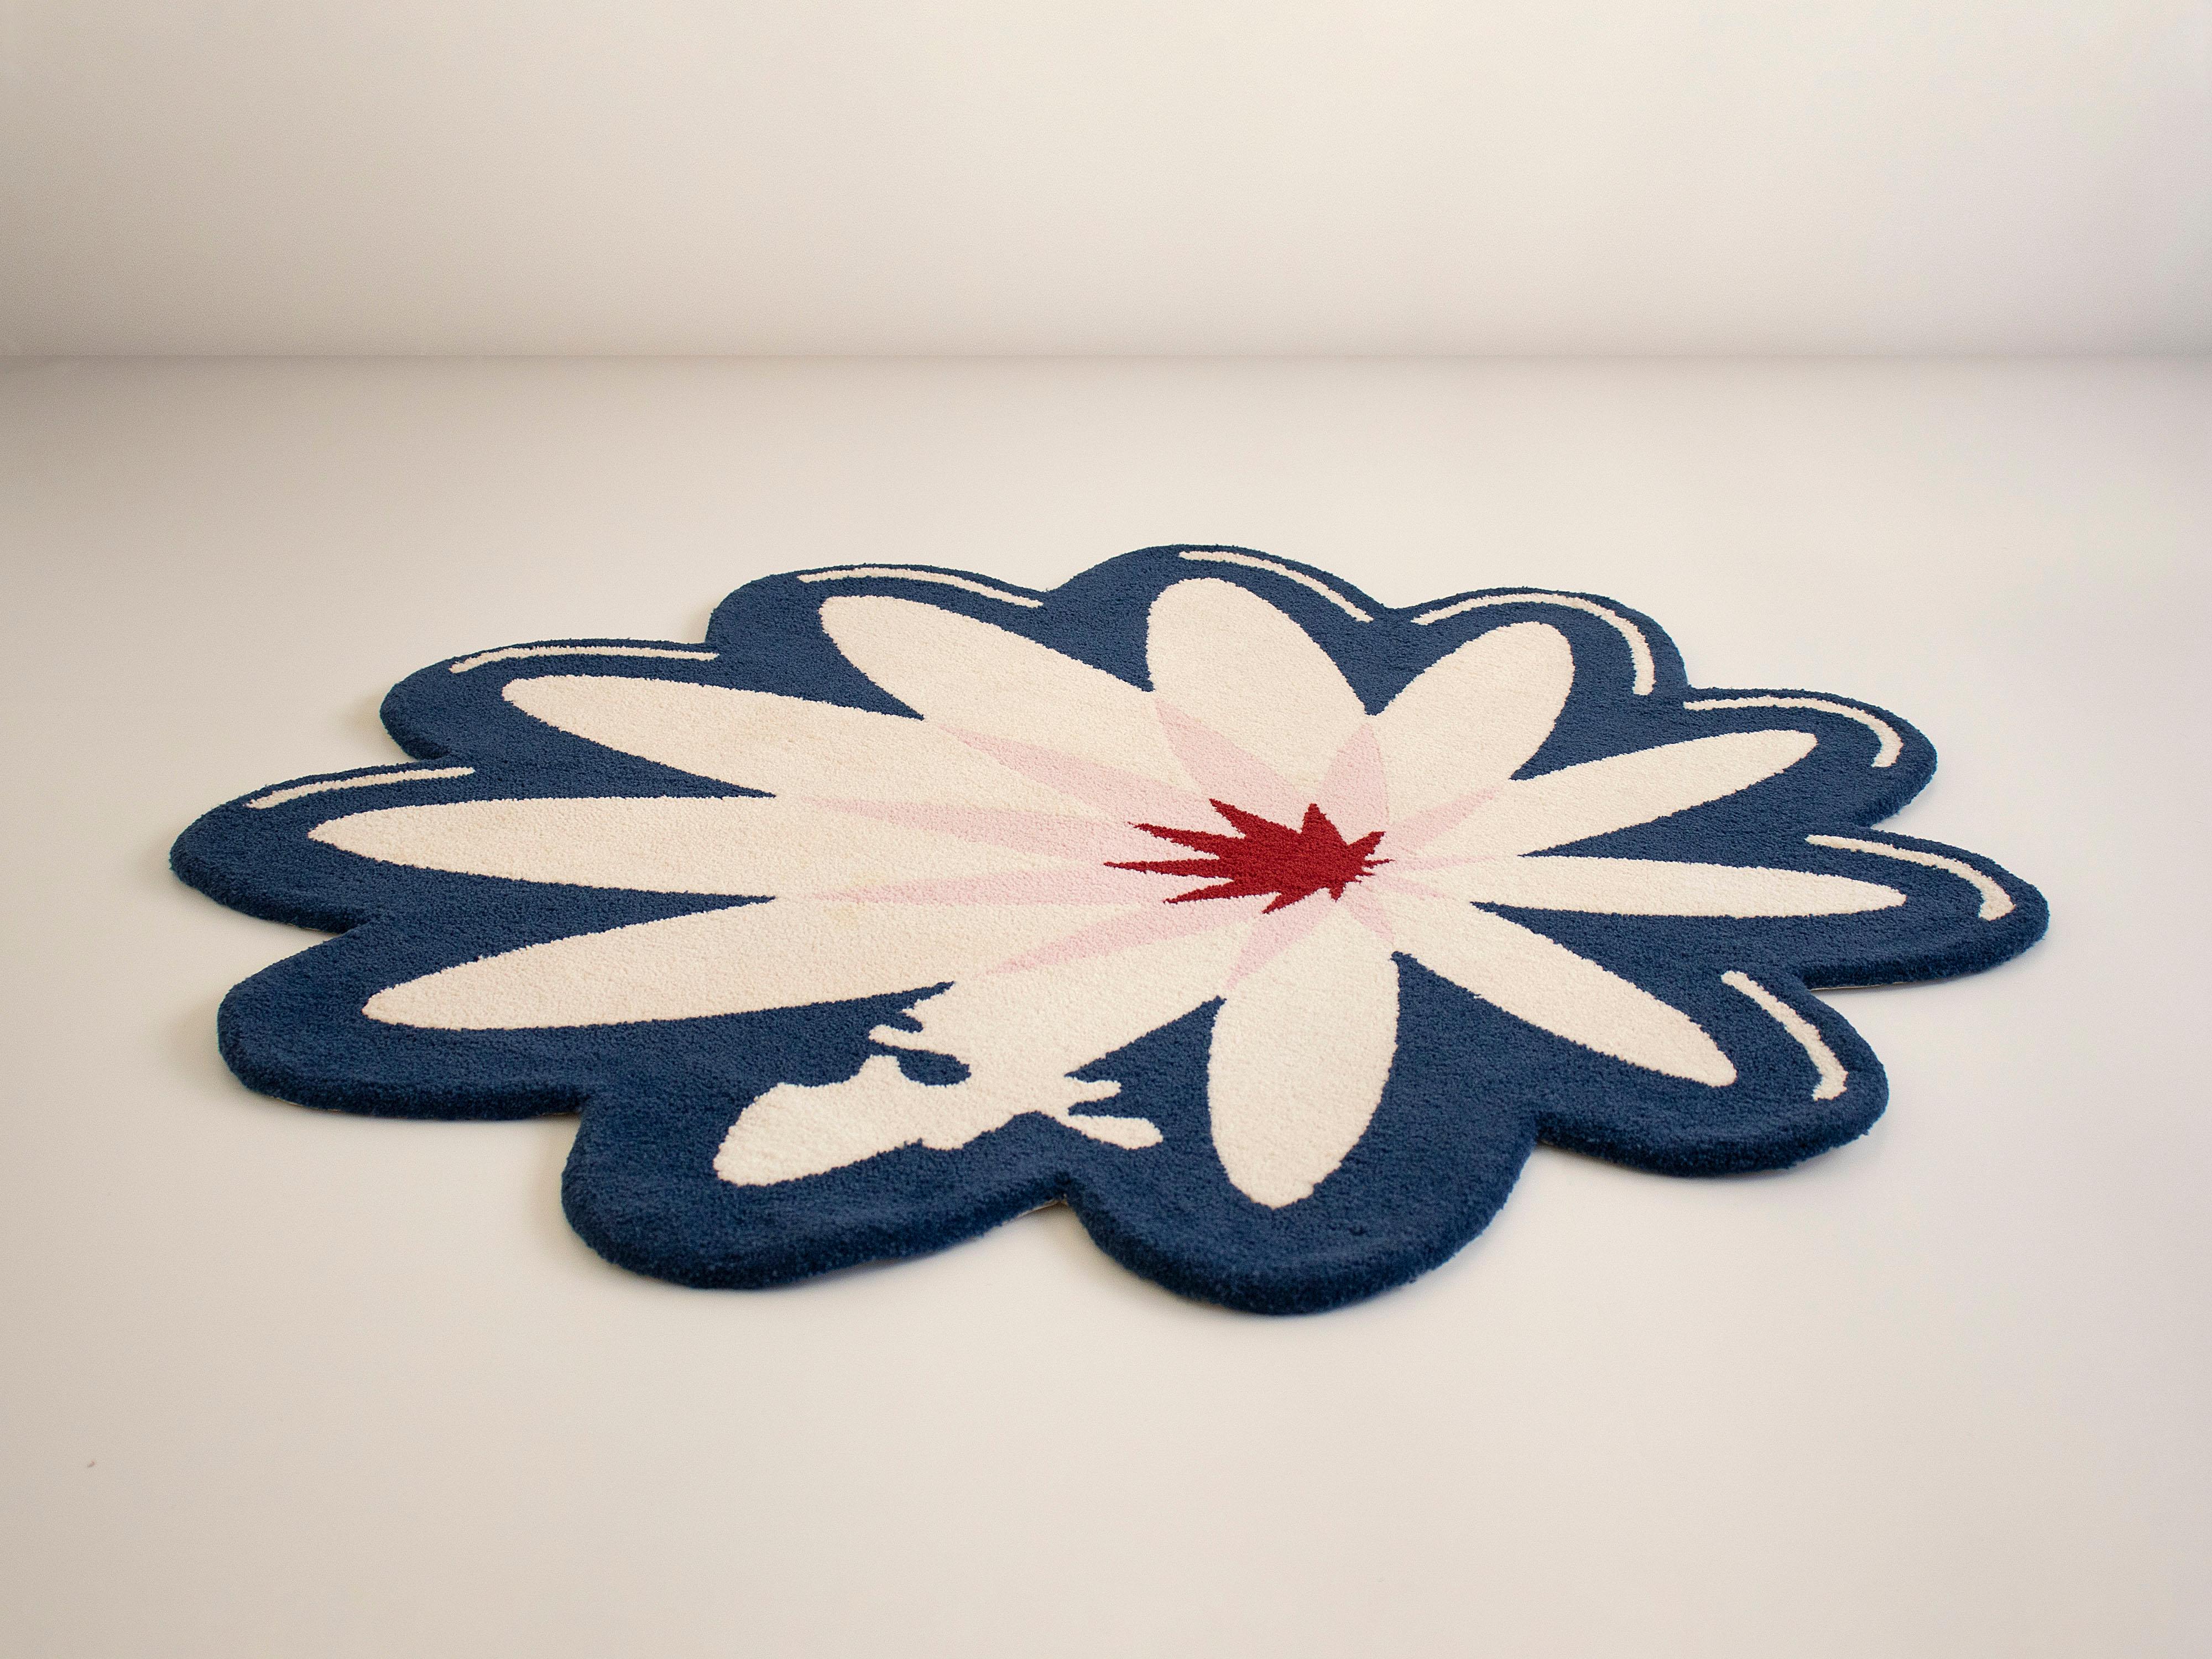 Nylon Round Blue, White & Red Flower Rug from Graffiti Collection by Paulo Kobylka For Sale